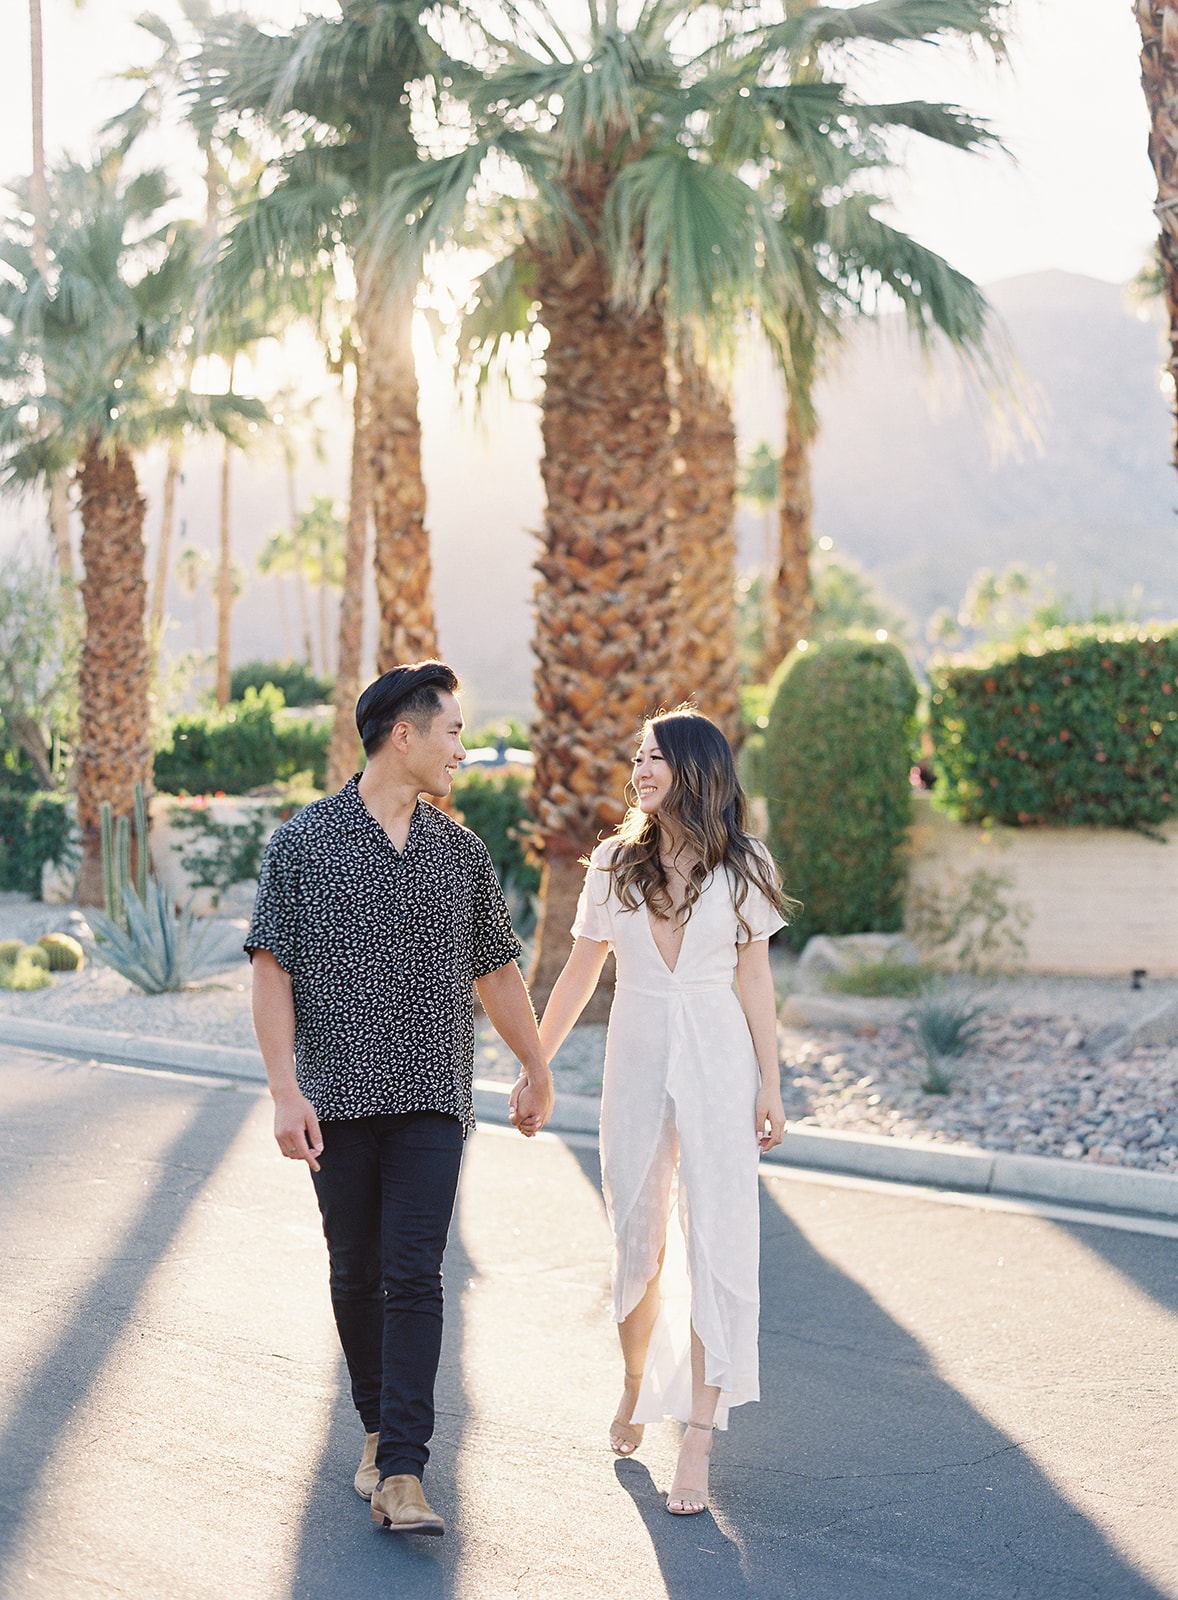 How To Propose In Los Angeles - Palm Springs